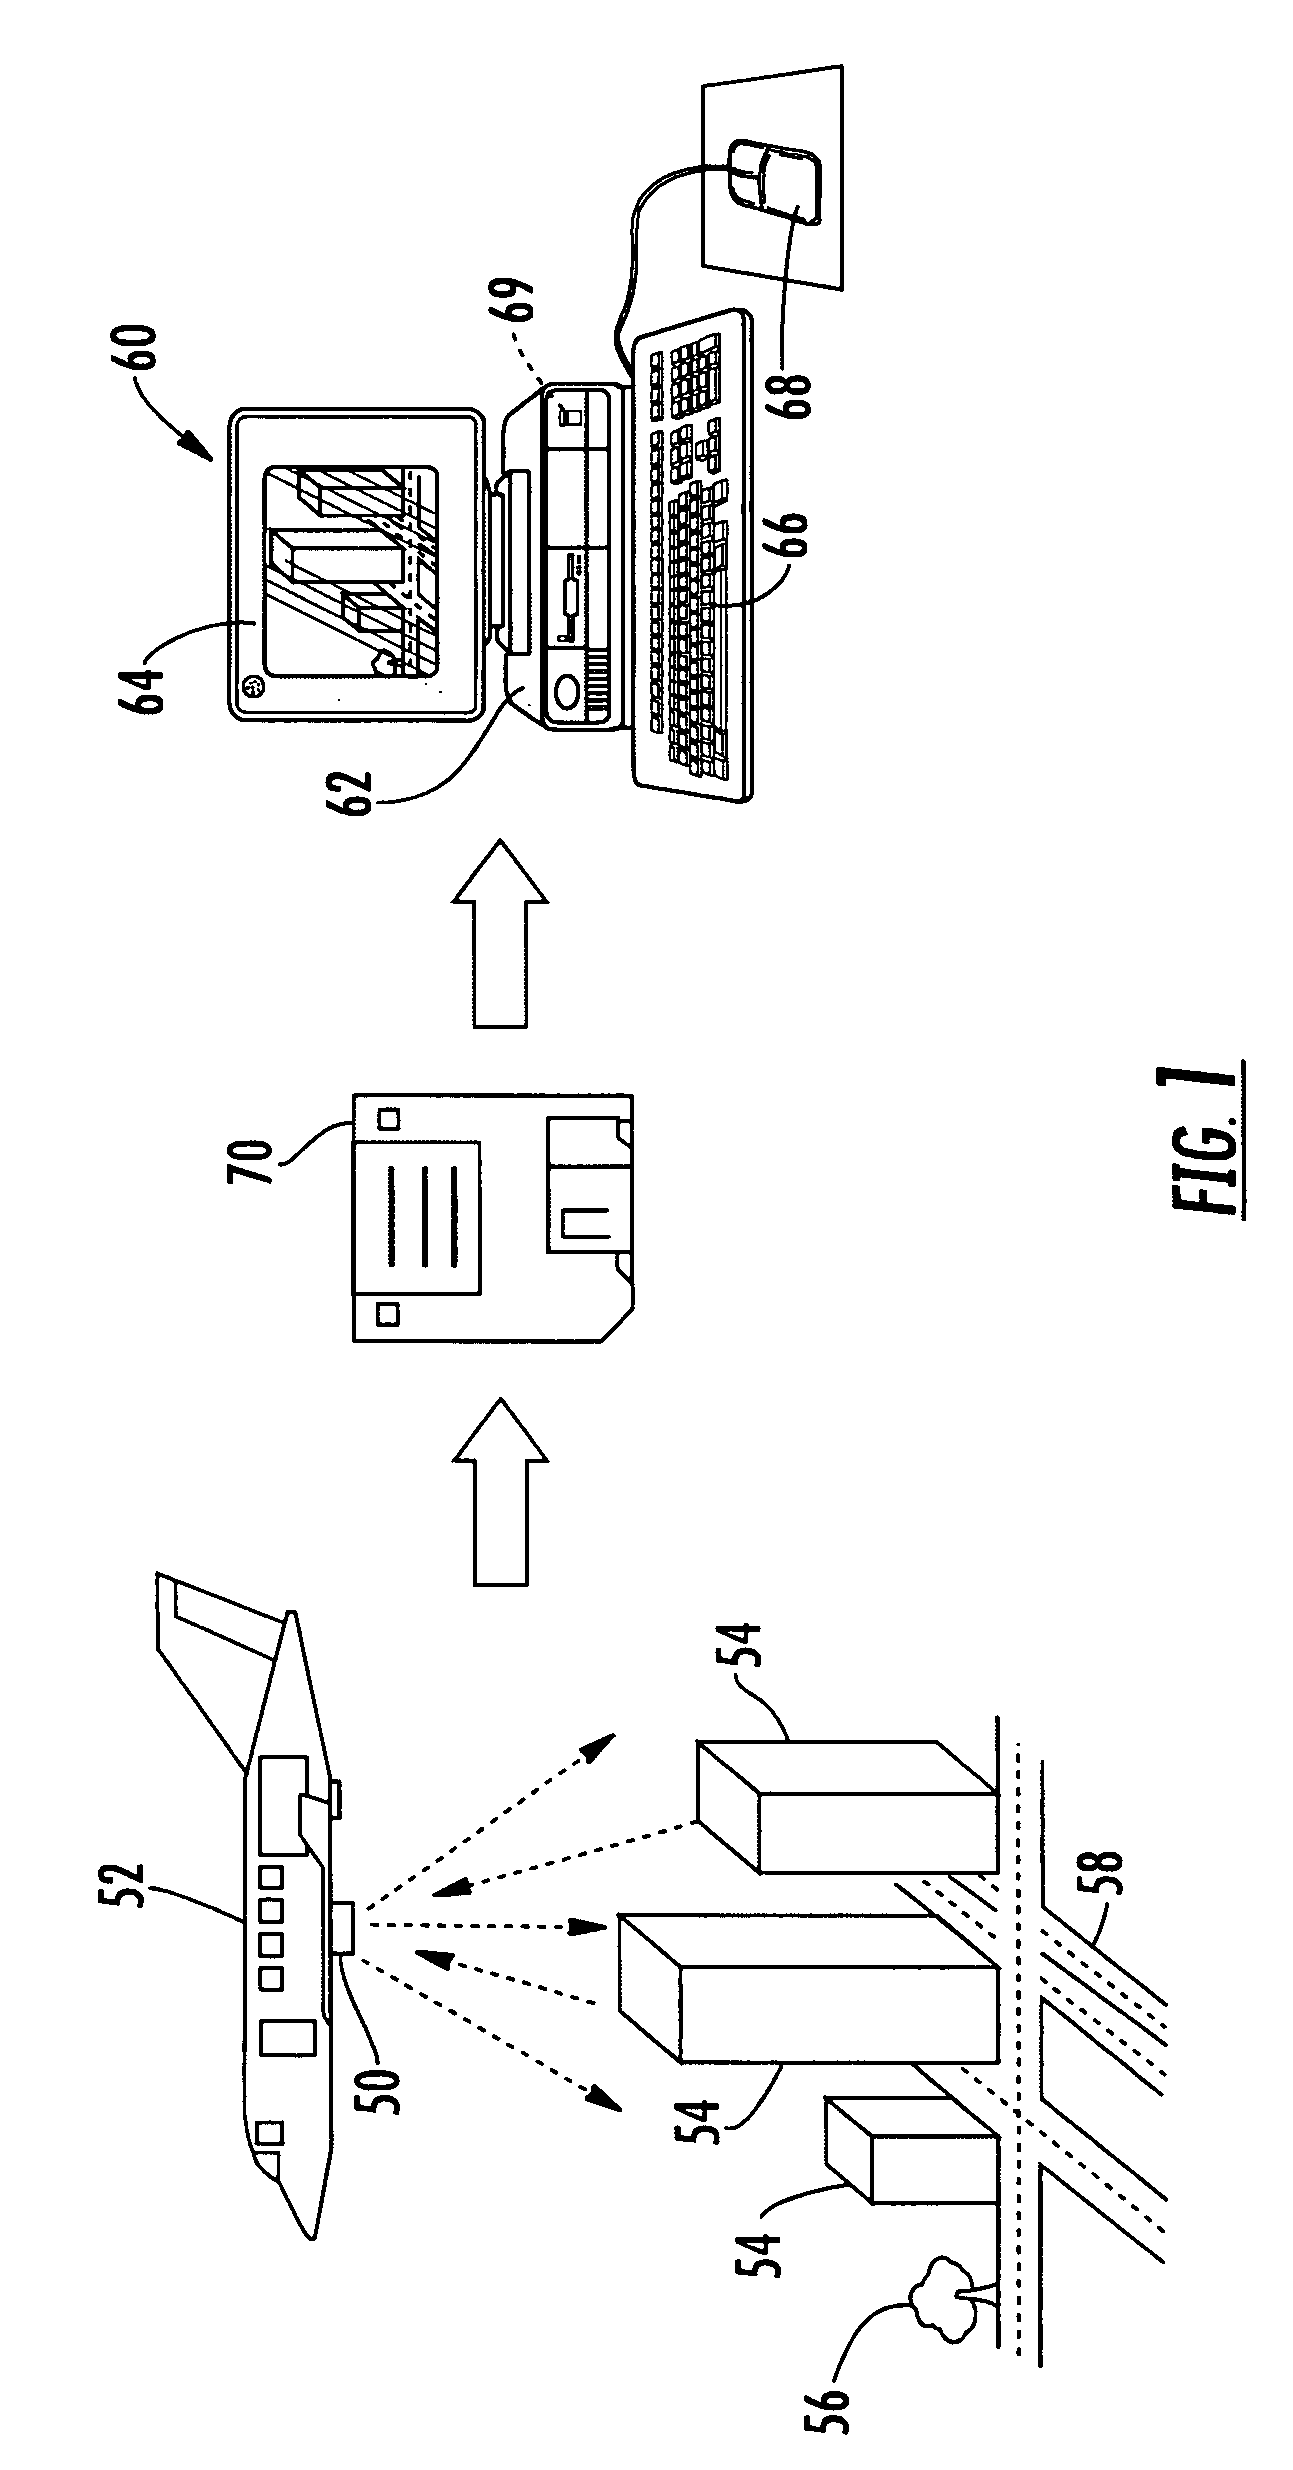 Method and apparatus for processing SAR images based on an anisotropic diffusion filtering algorithm